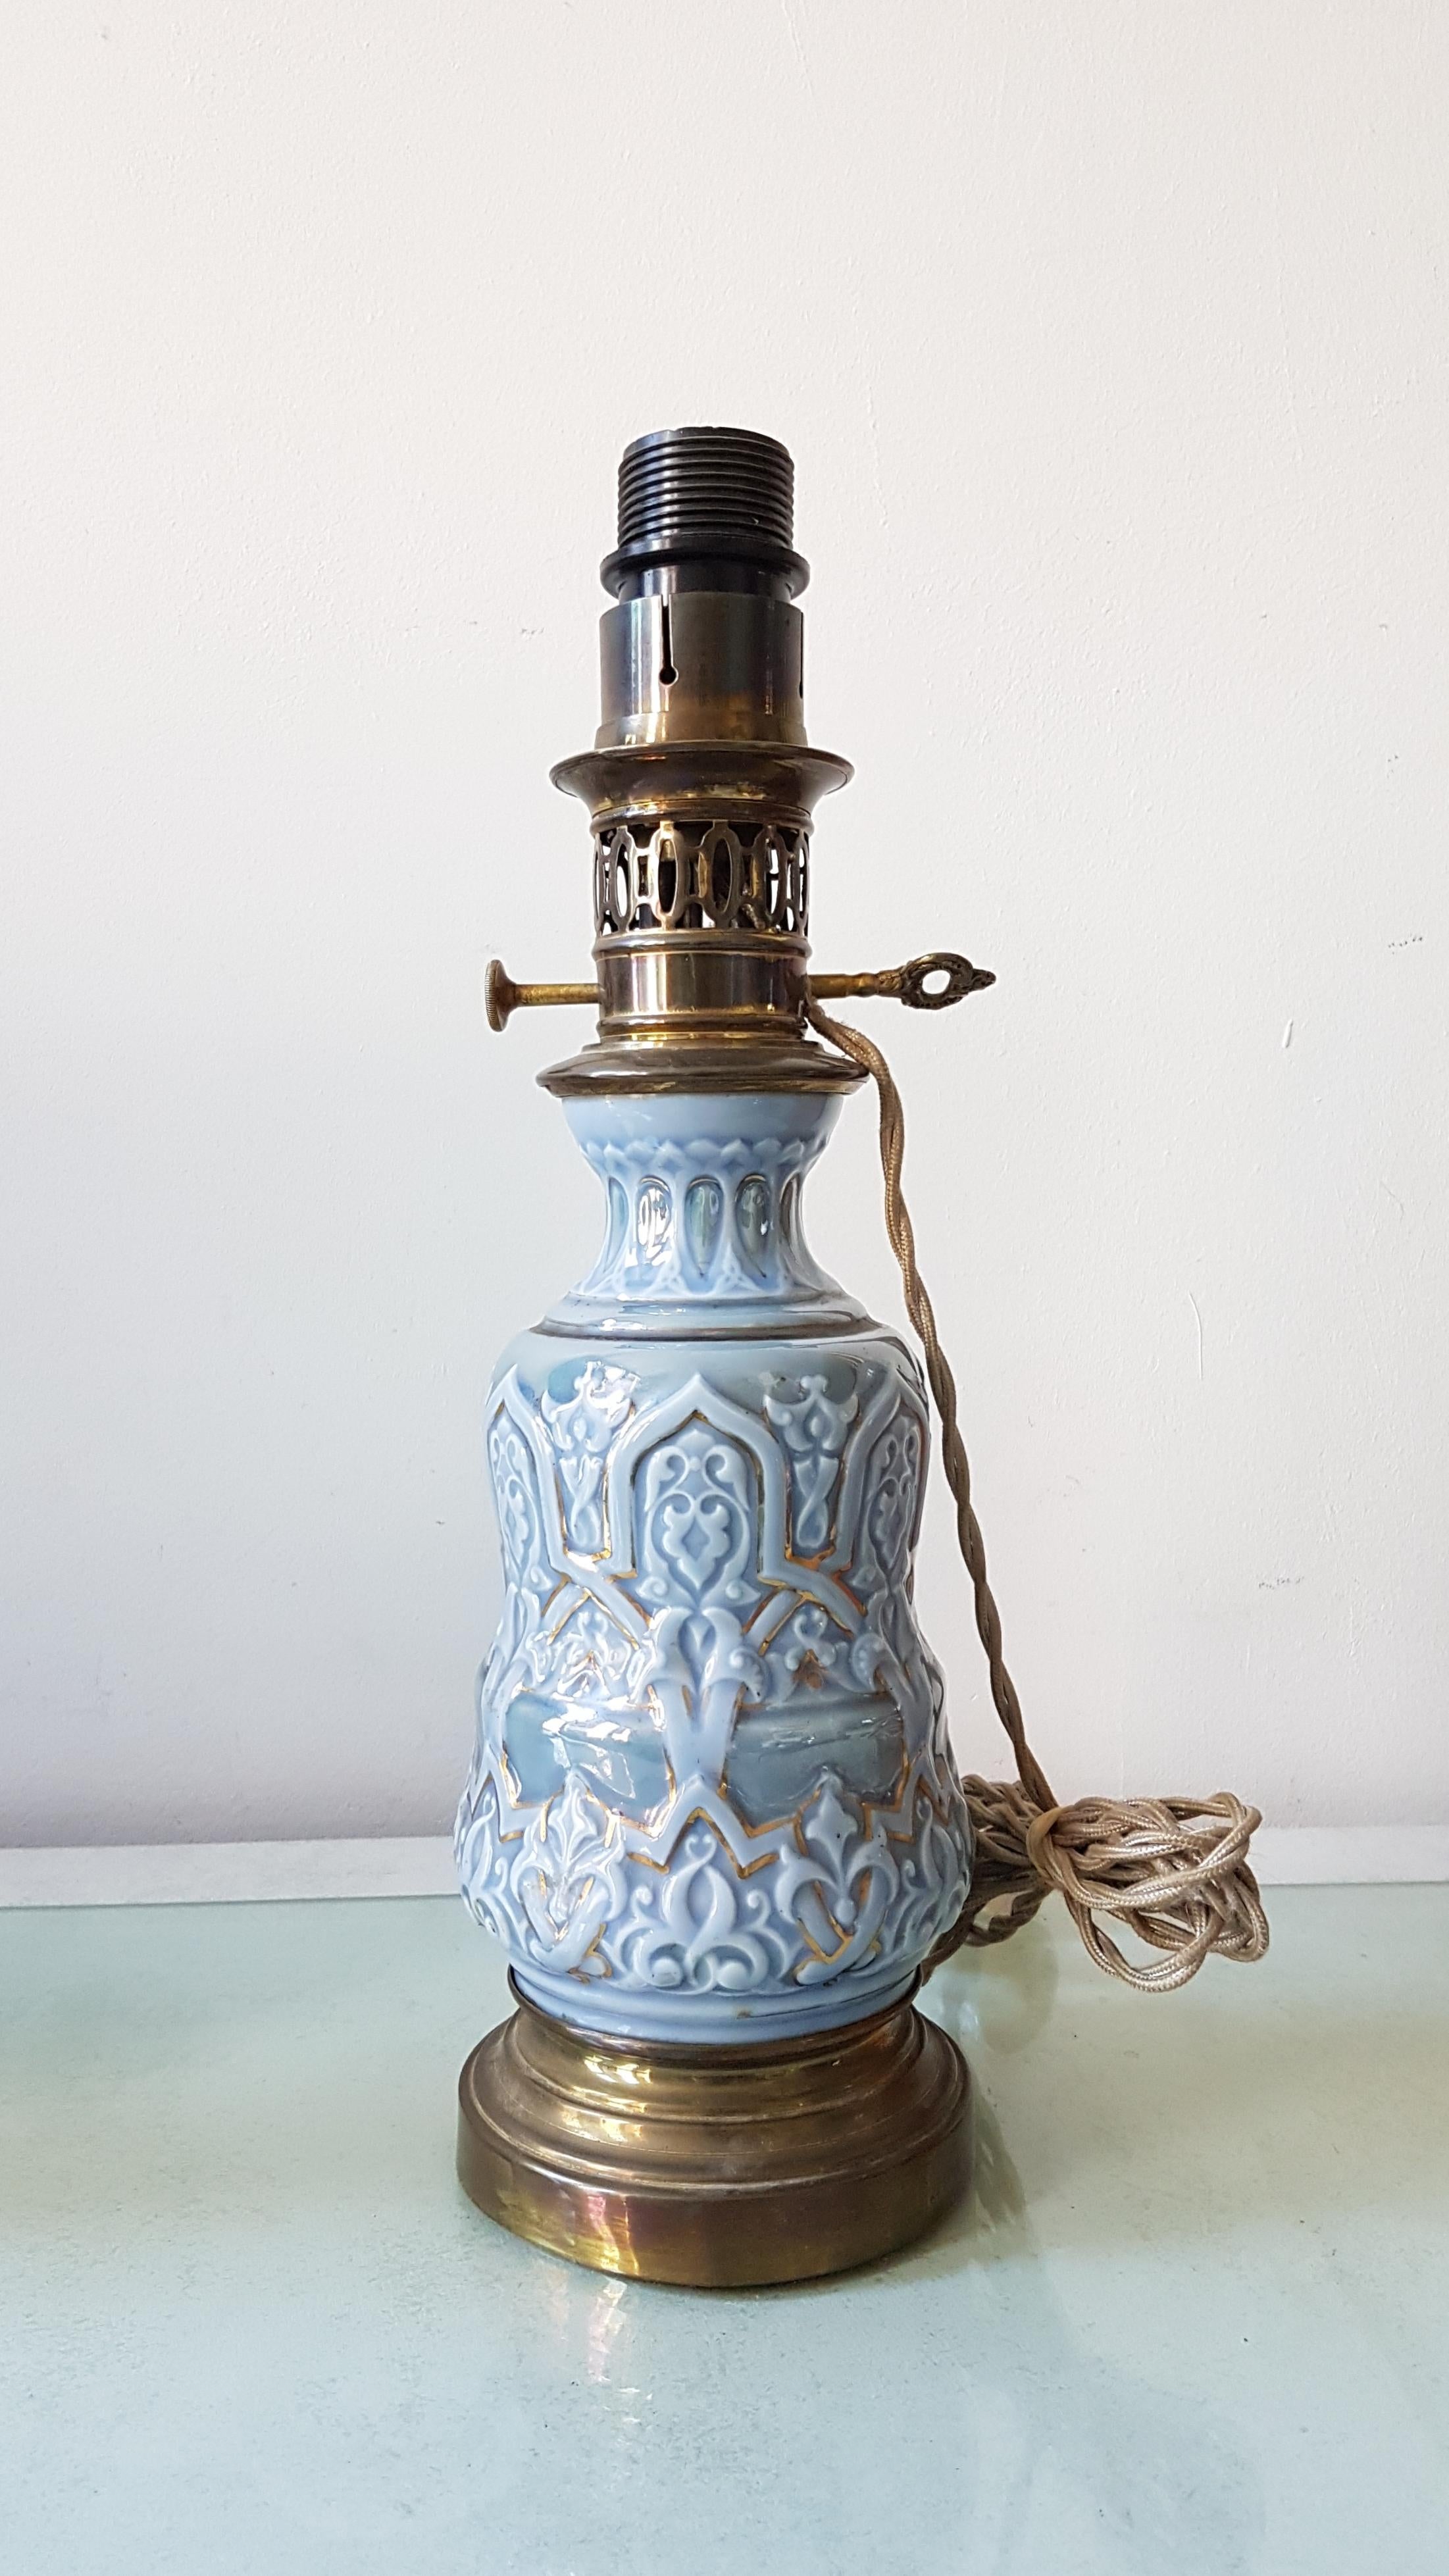 An elegant converted oil lamp made of ceramic in beautiful colors.
Late 19th century, converted kerosene lamp in blue with modeled details in turquoise and gold. Wonderful brass piecework chimneys and keys.

This lamp would look fine in all kinds